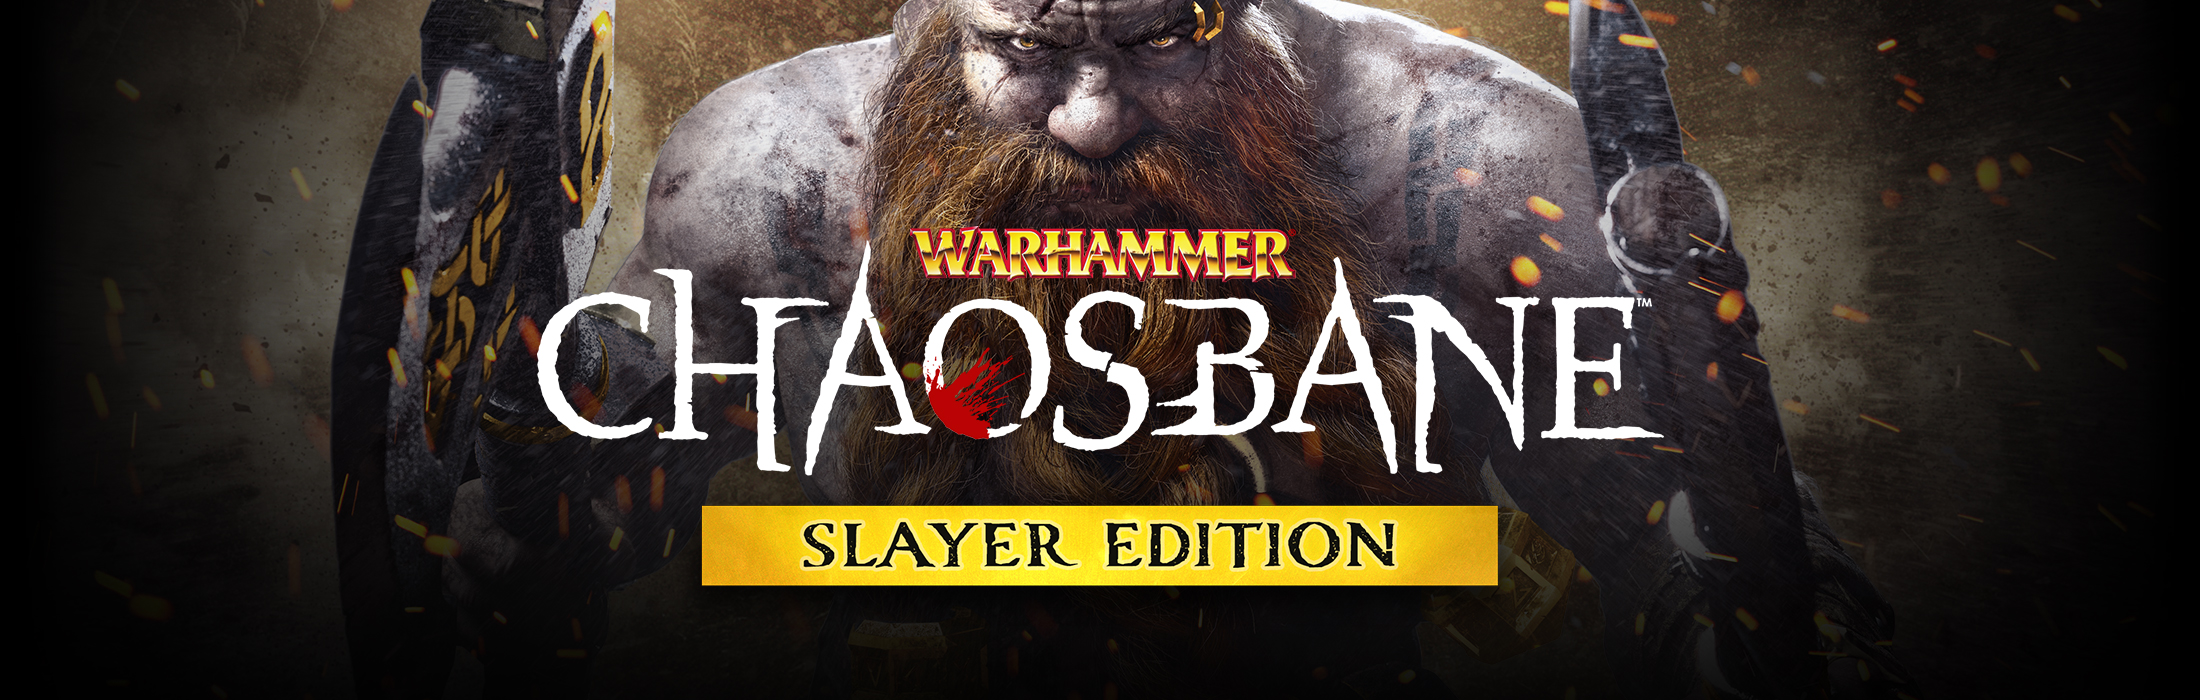 chaosbane slayer edition review download free